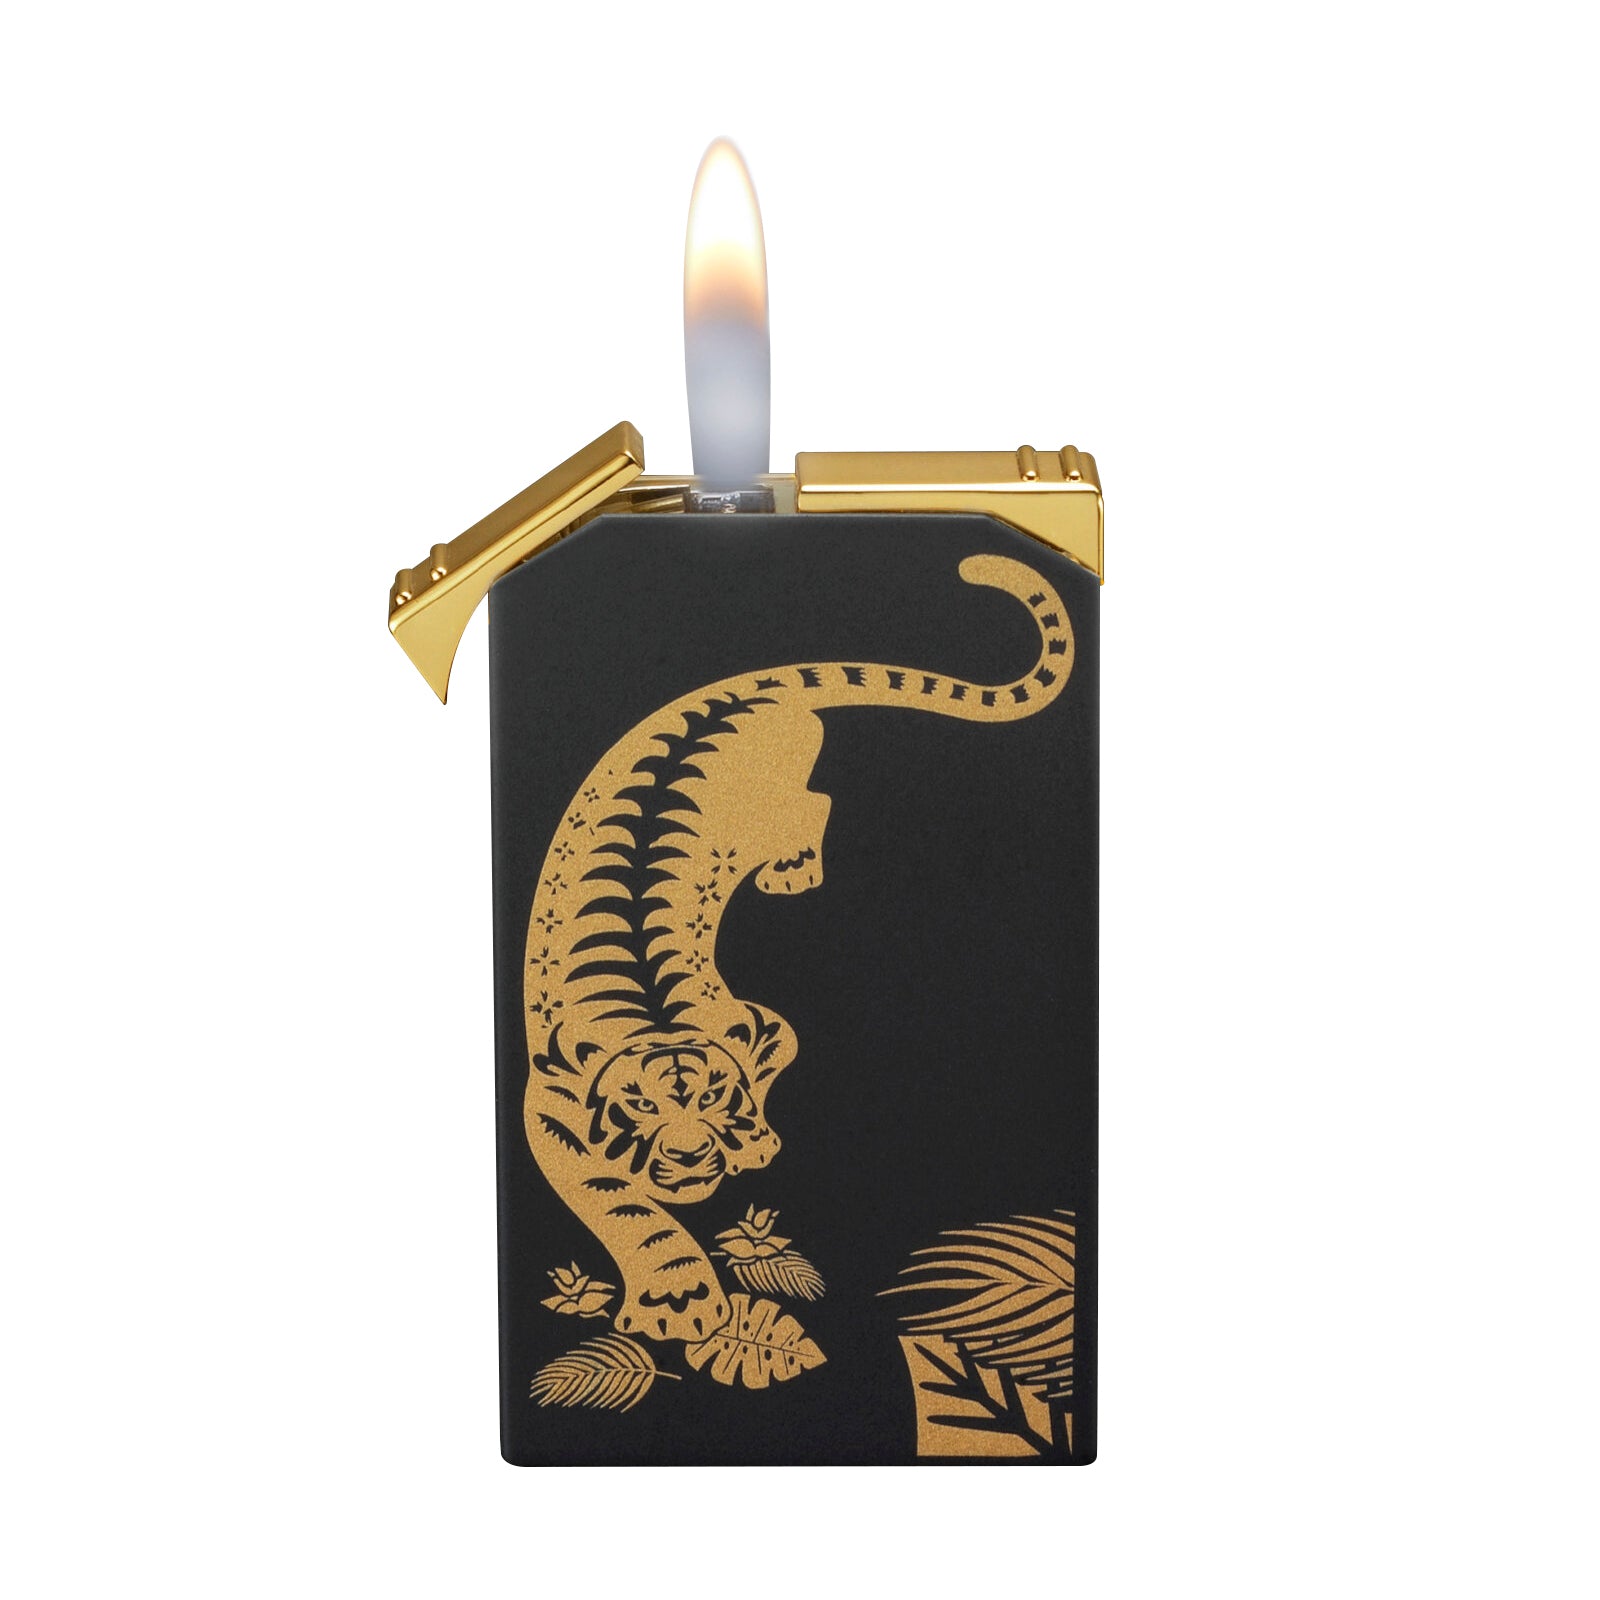 SIGLO ACCESSORIES Siglo Tiger Lighter - Shiny Black